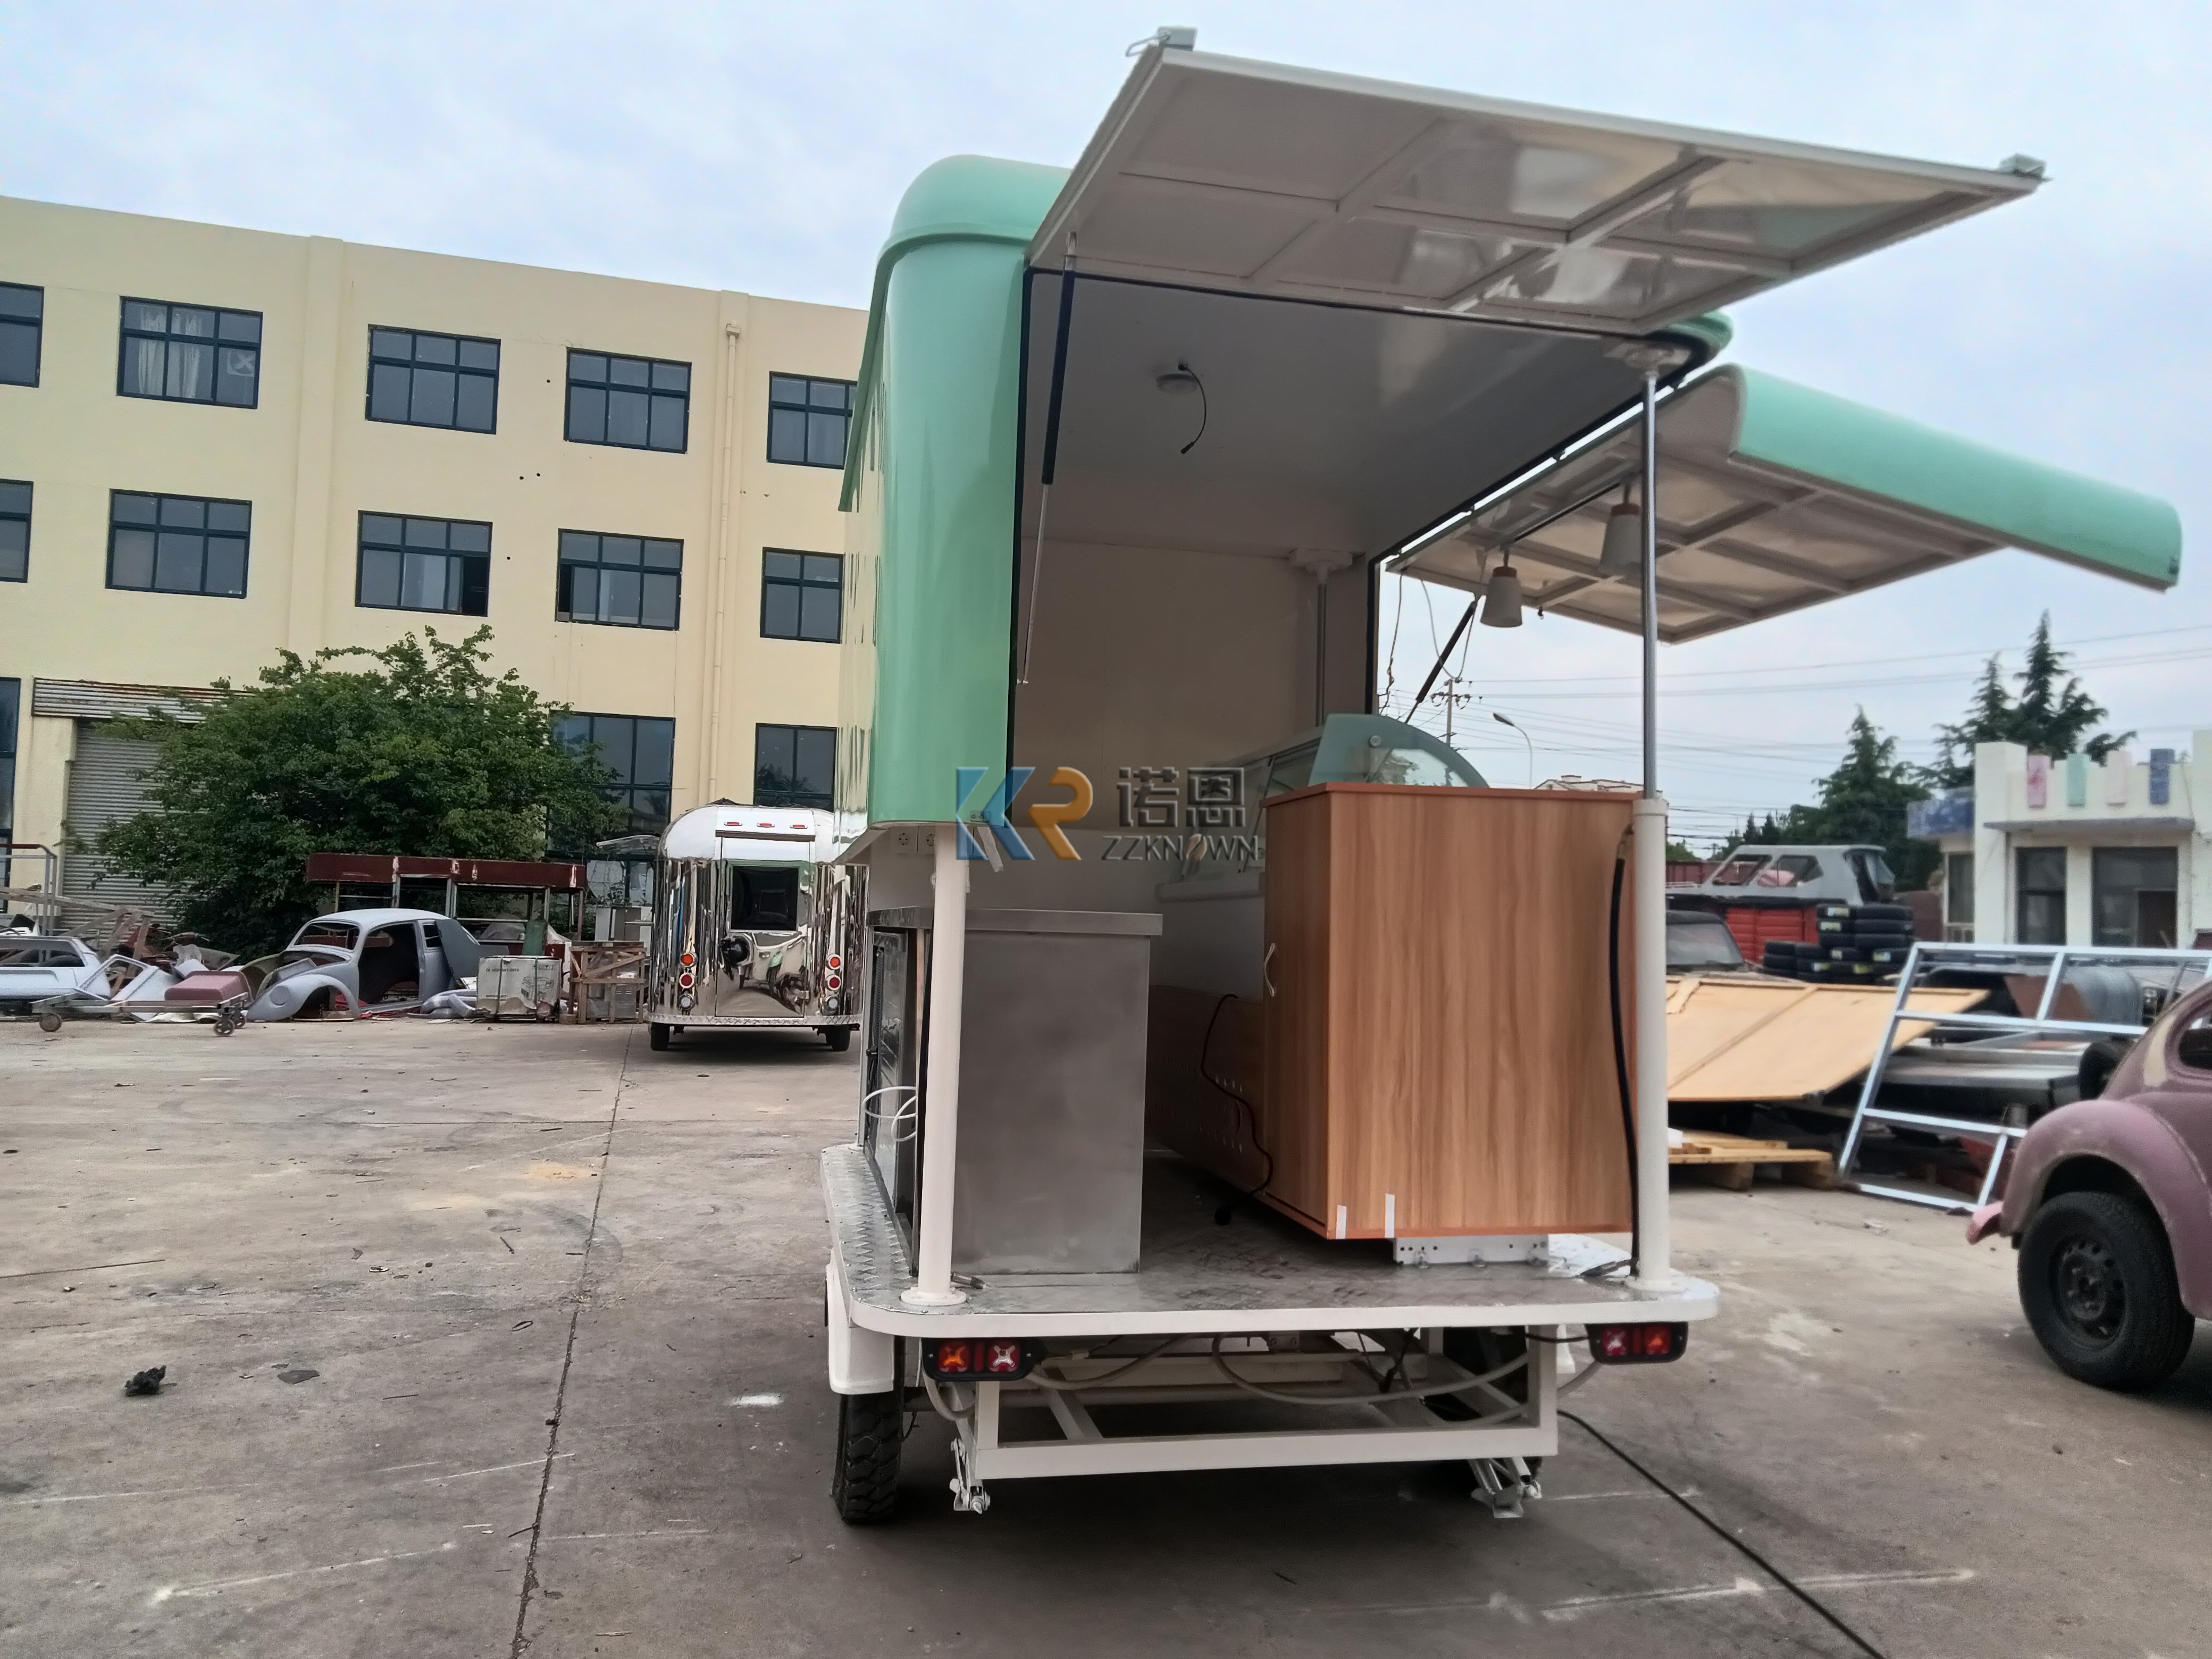 KN-APE-CG China Famous Manufacturer Tricycle Food Cart With Low Investment Europe Customized APE Tricycle Food Cart